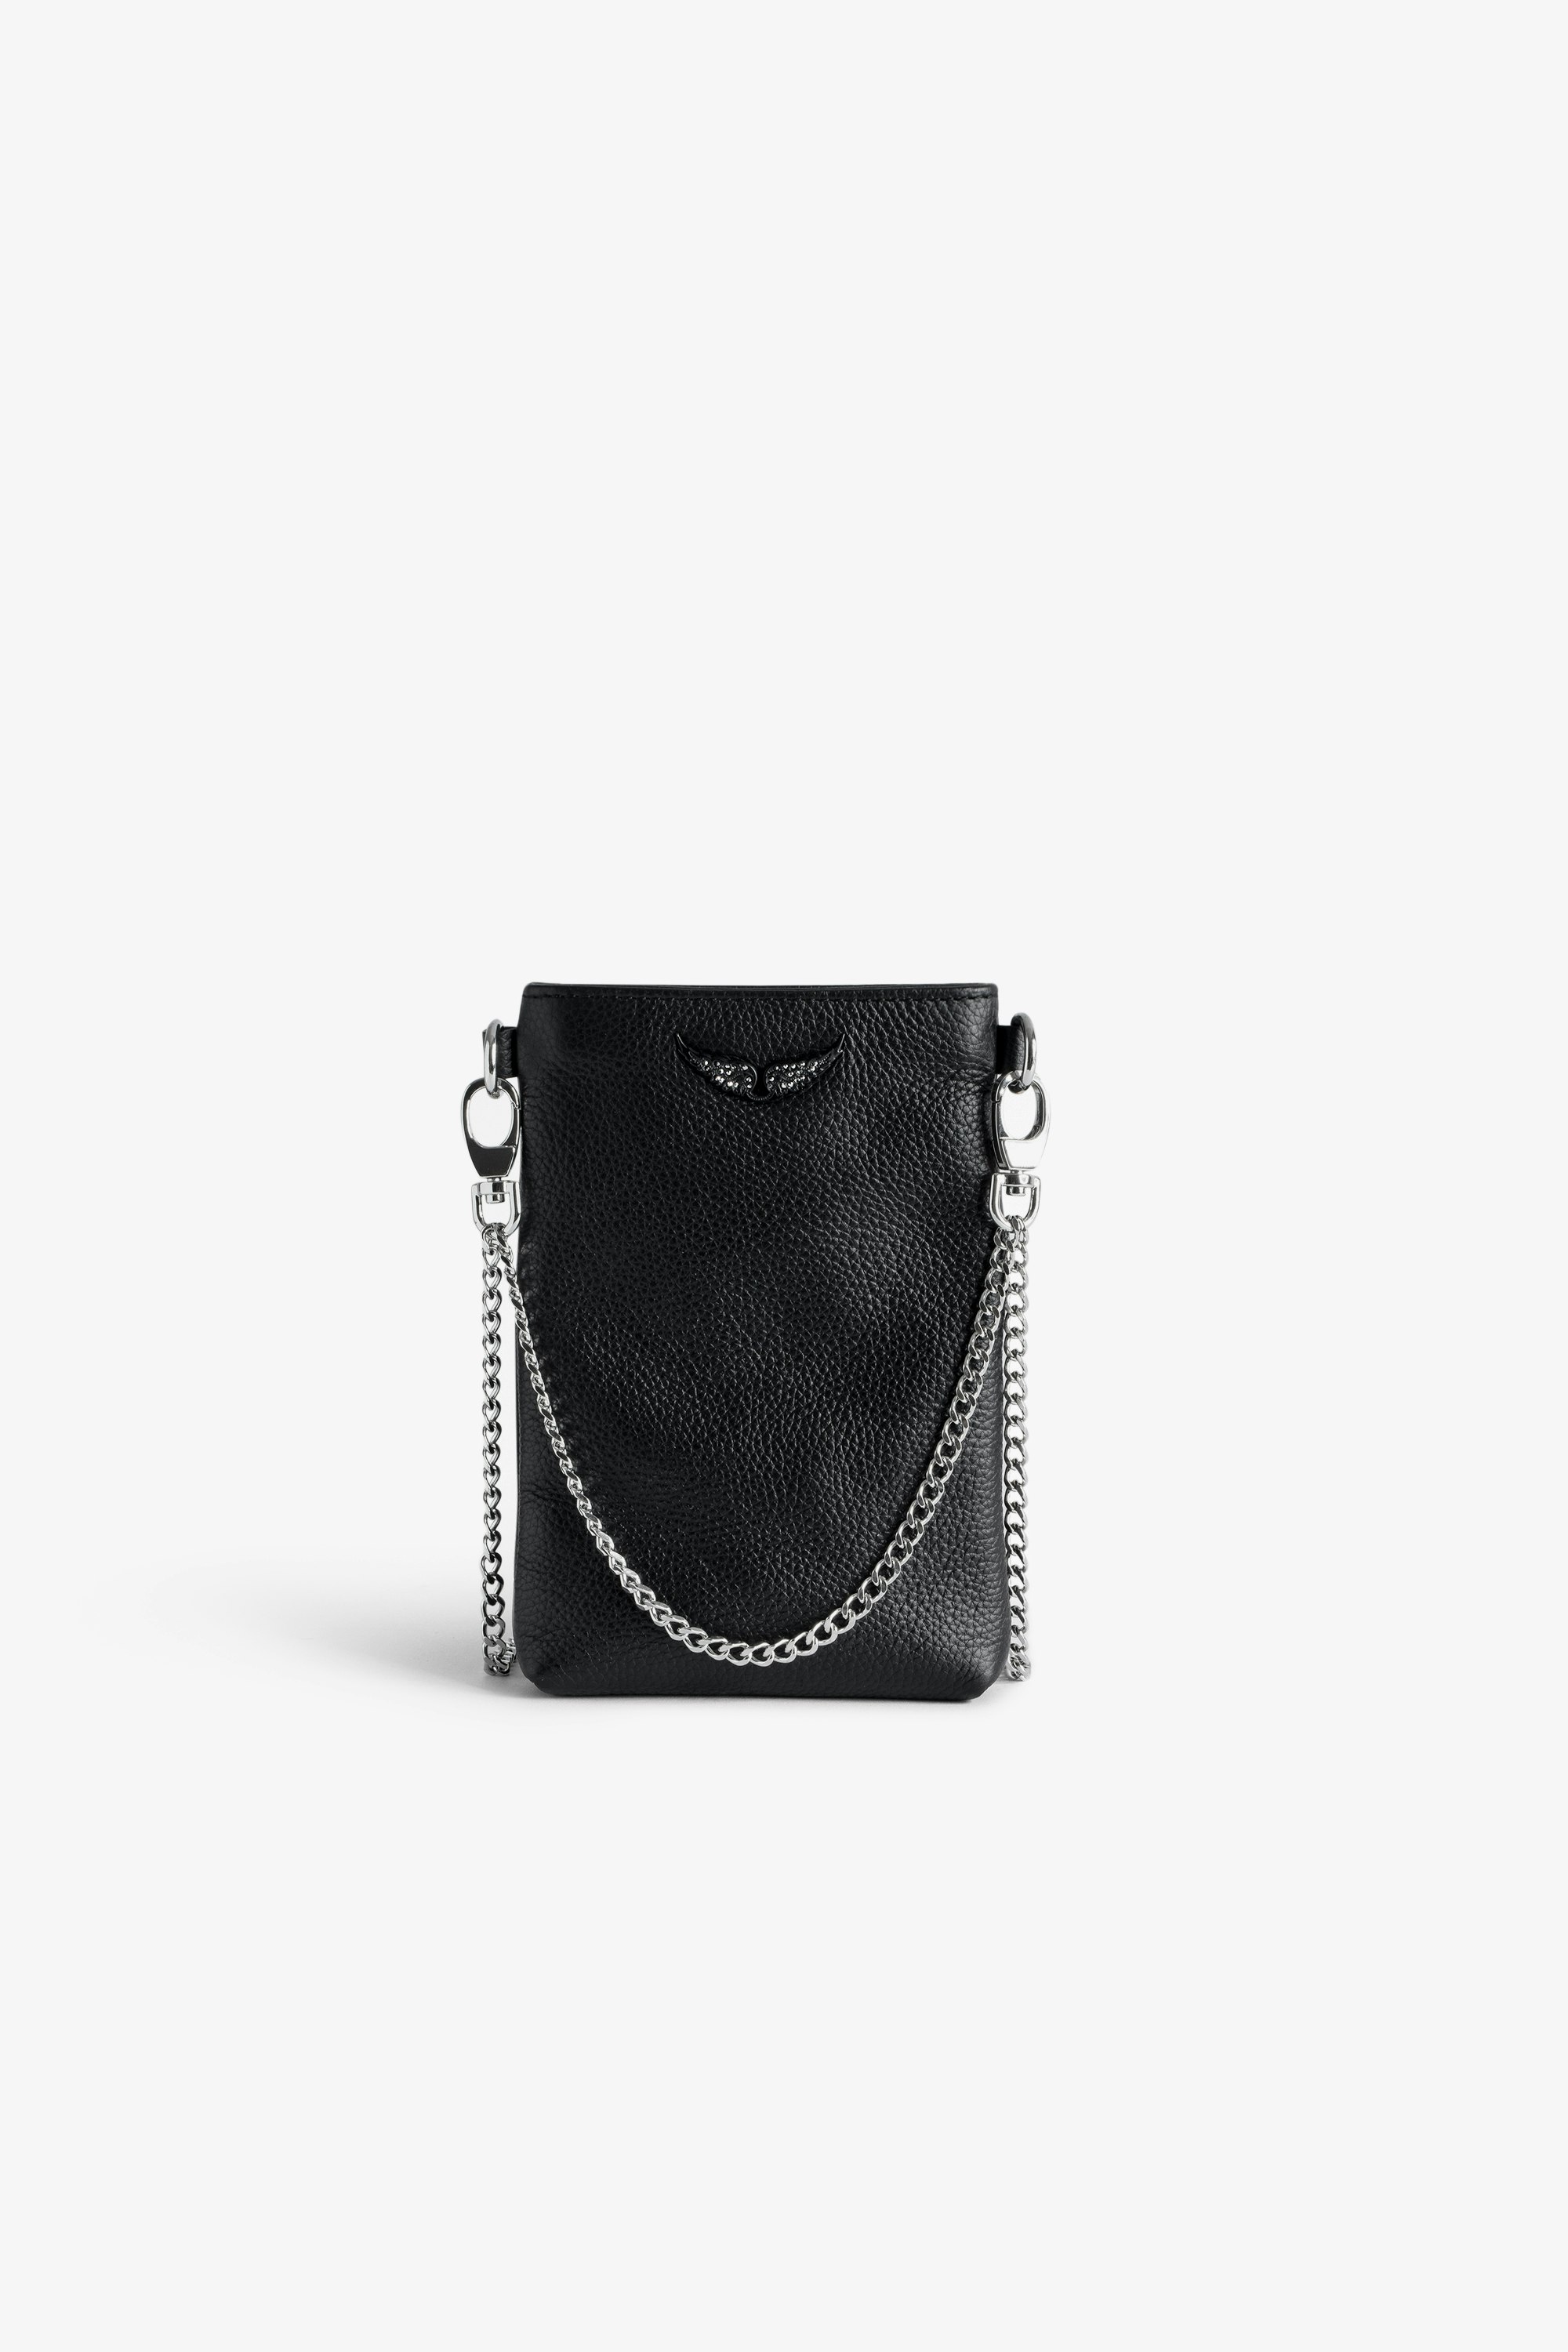 Rock Pouch Clutch - Women’s black grained leather phone pouch with chains and diamanté wings charm.